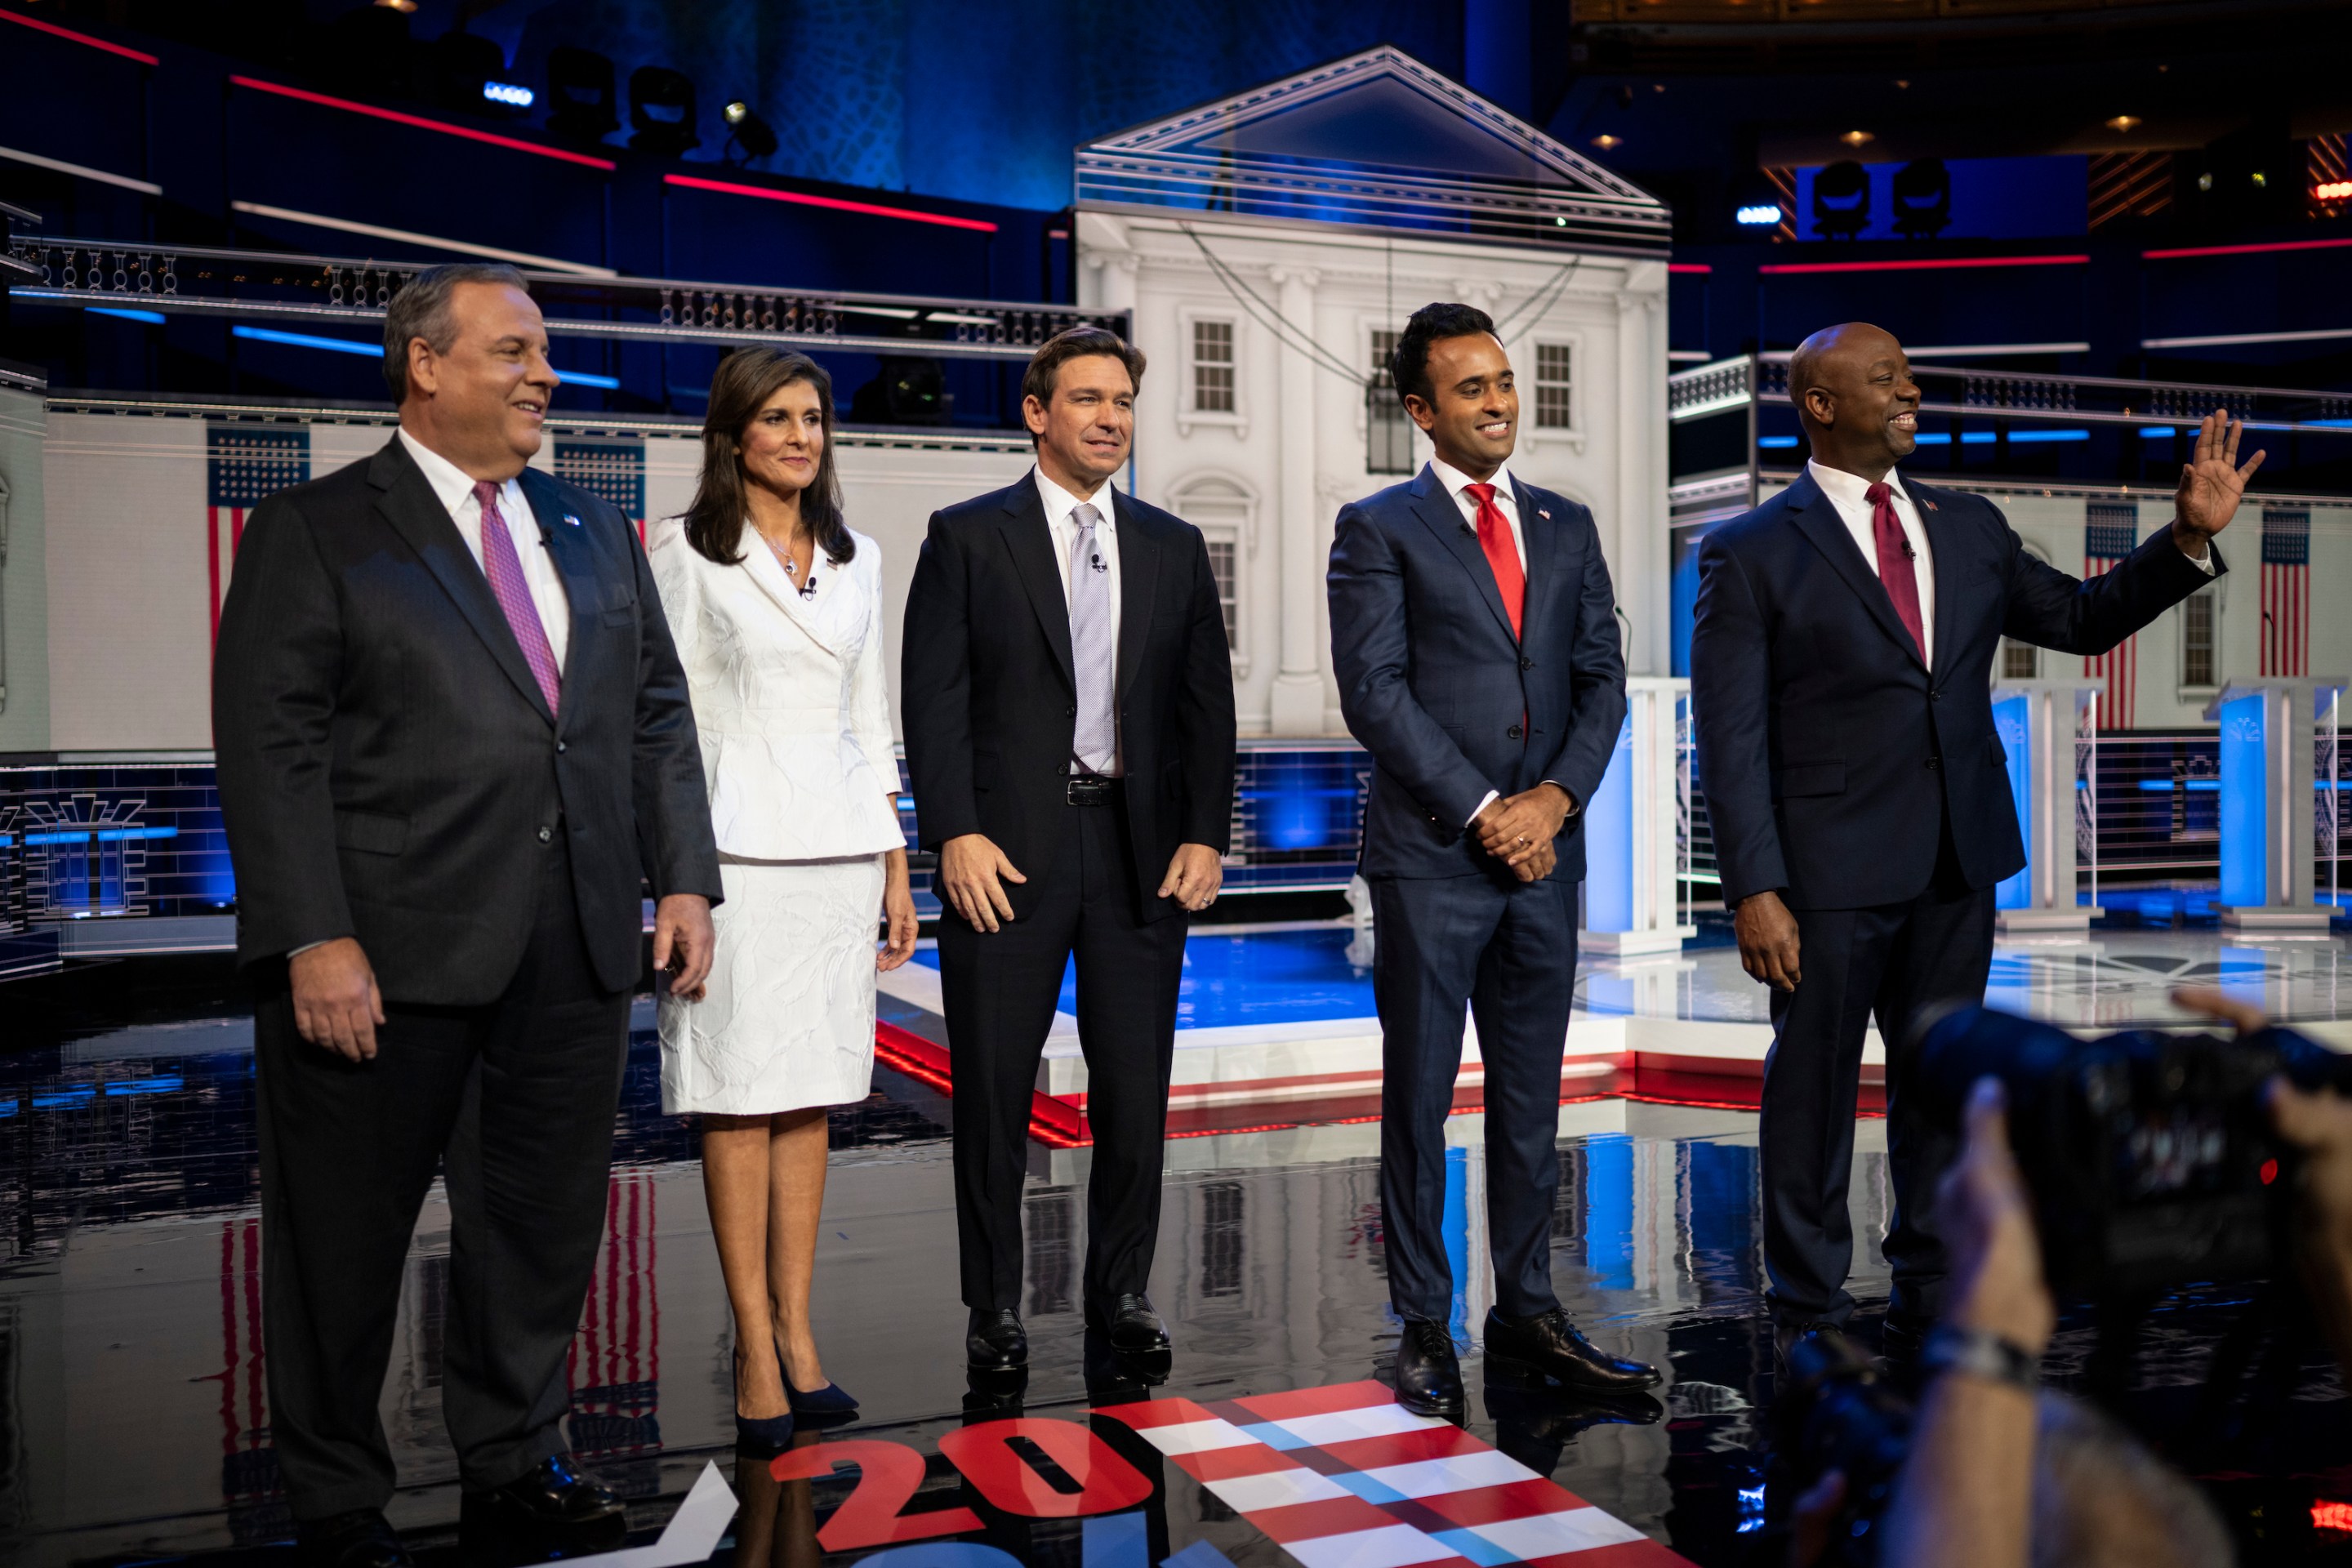 Chris Christie, Nikki Haley, Ron DeSantis, Vivek Ramaswamy, and Tim Scott standing onstage, all very normally, at a GOP primary debate in Miami.